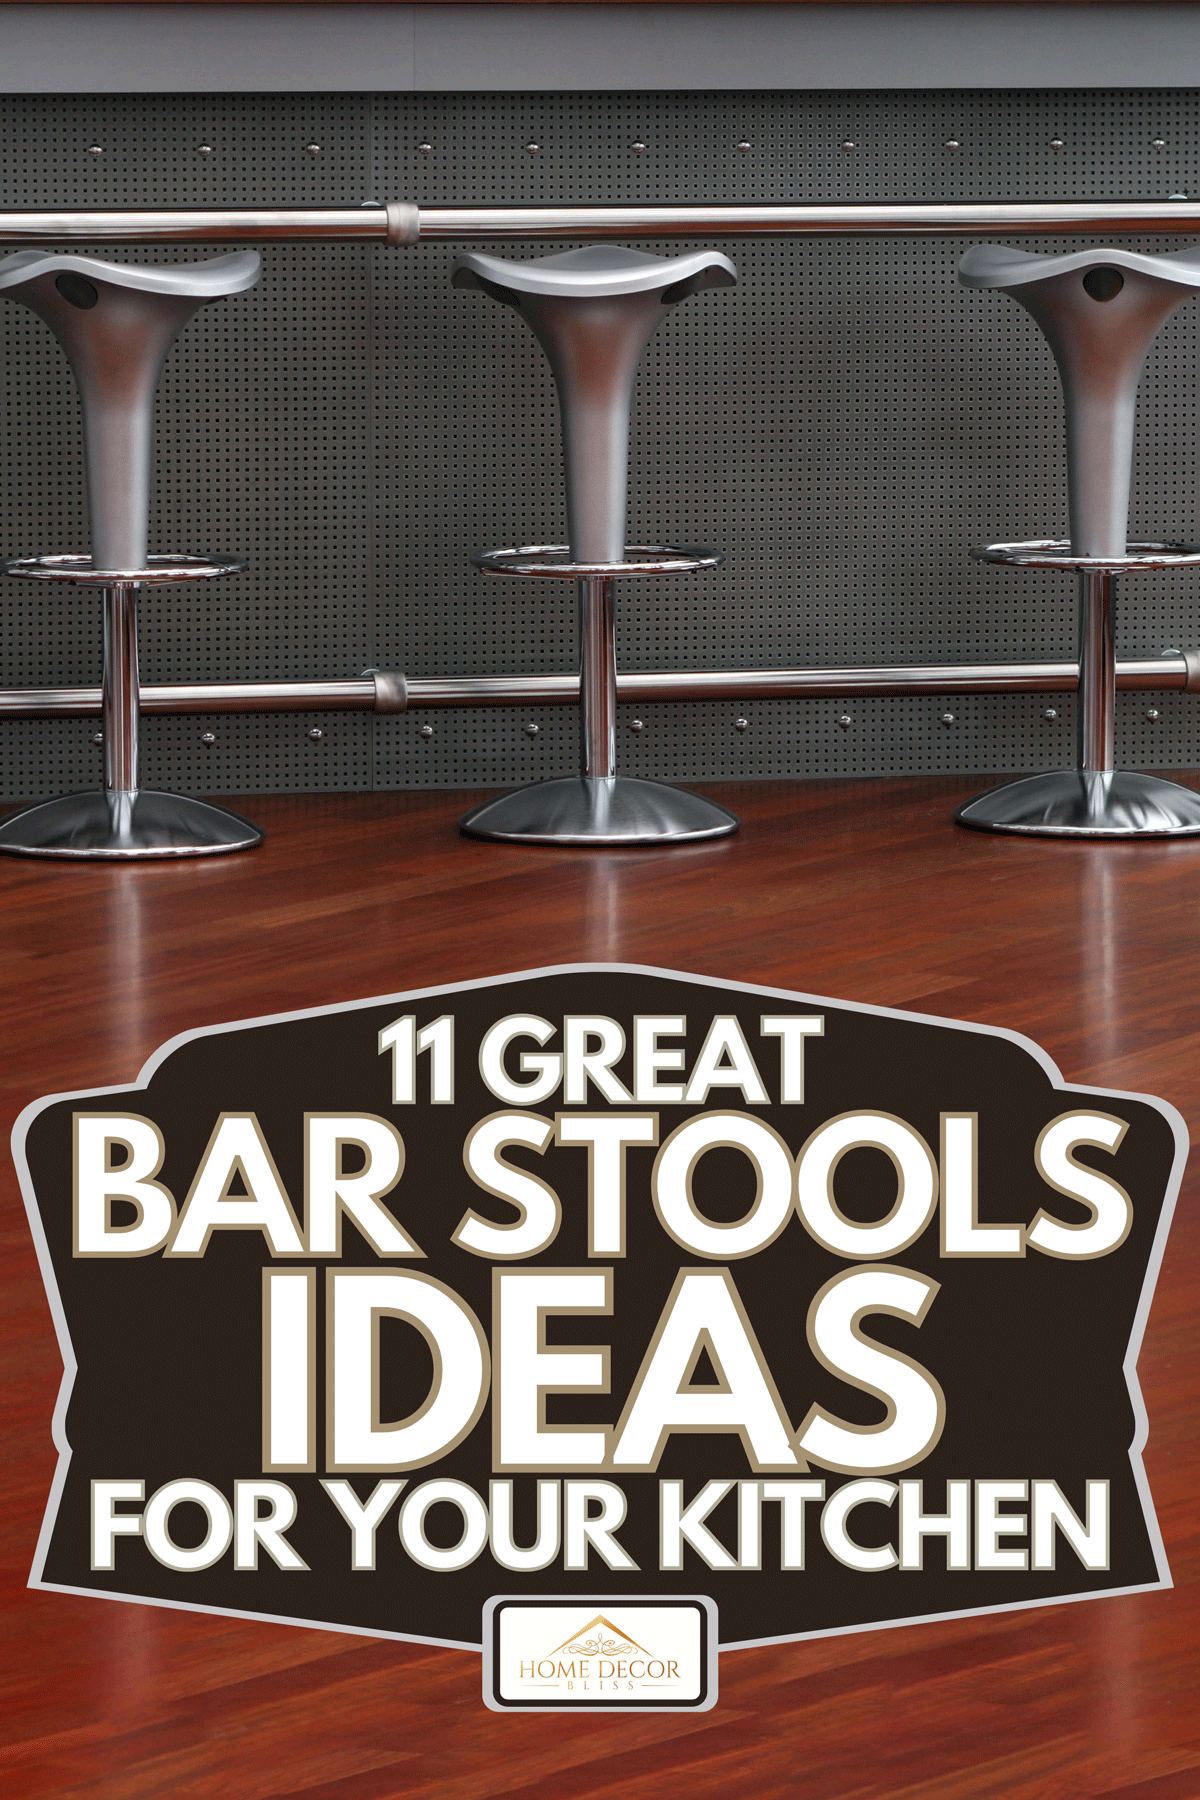 A series of gray bar stools at the bar, 11 Great Bar Stools Ideas For Your Kitchen